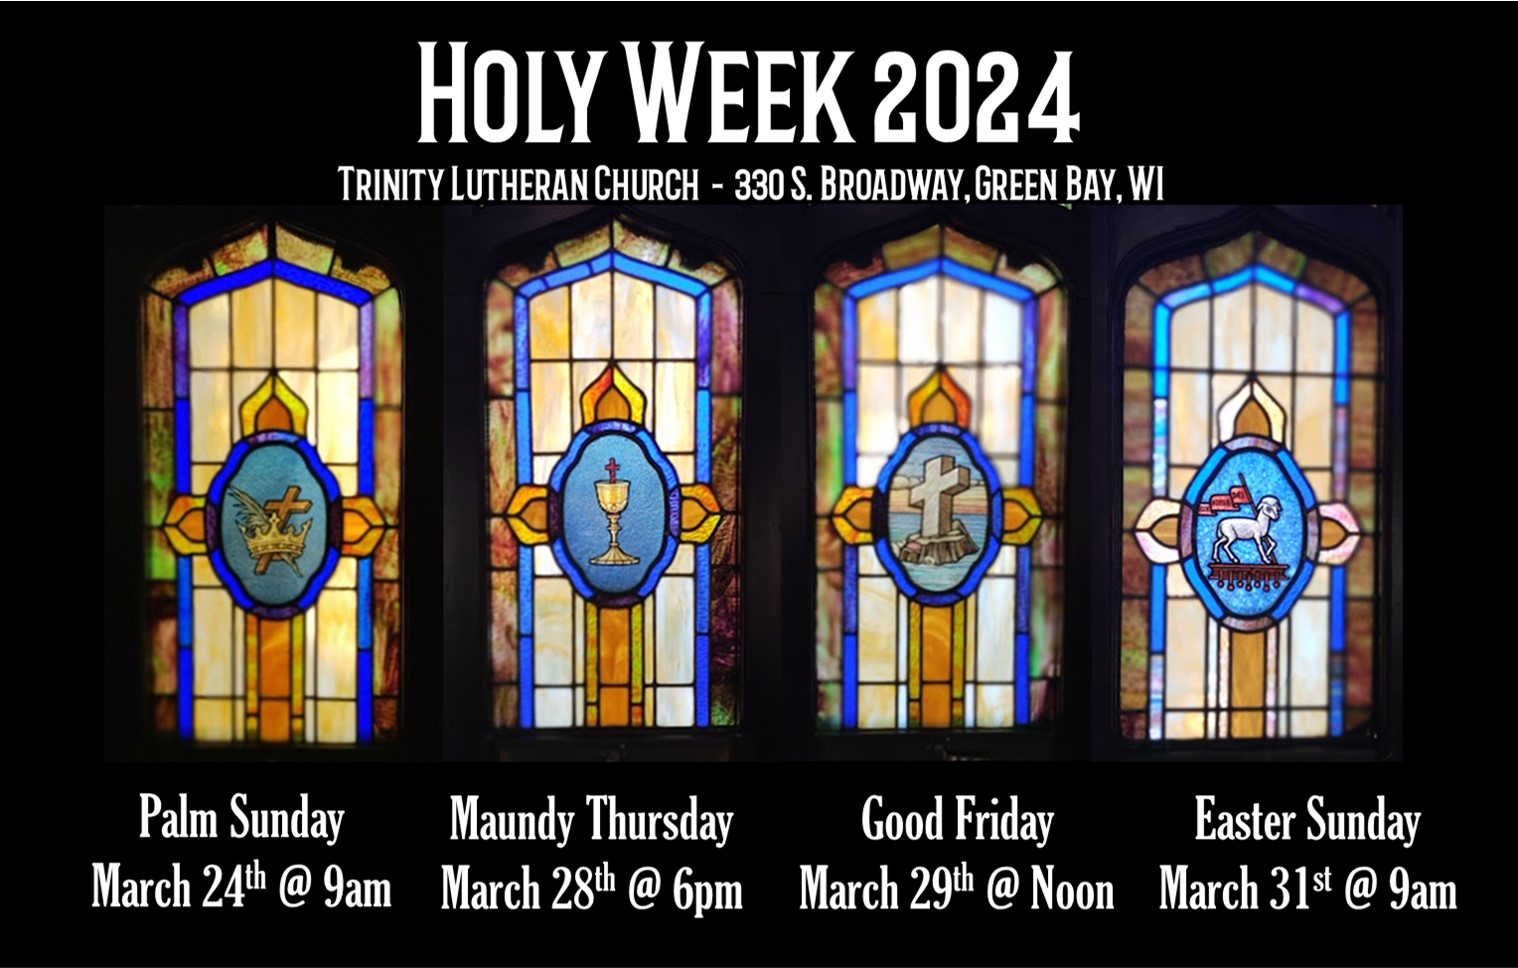 Holy Week: Palm Sunday, March 24, 9 am; Maundy Thursday, March 28, 6pm; Good Friday, March 29, noon;Easter Sunday, March 21, 9am